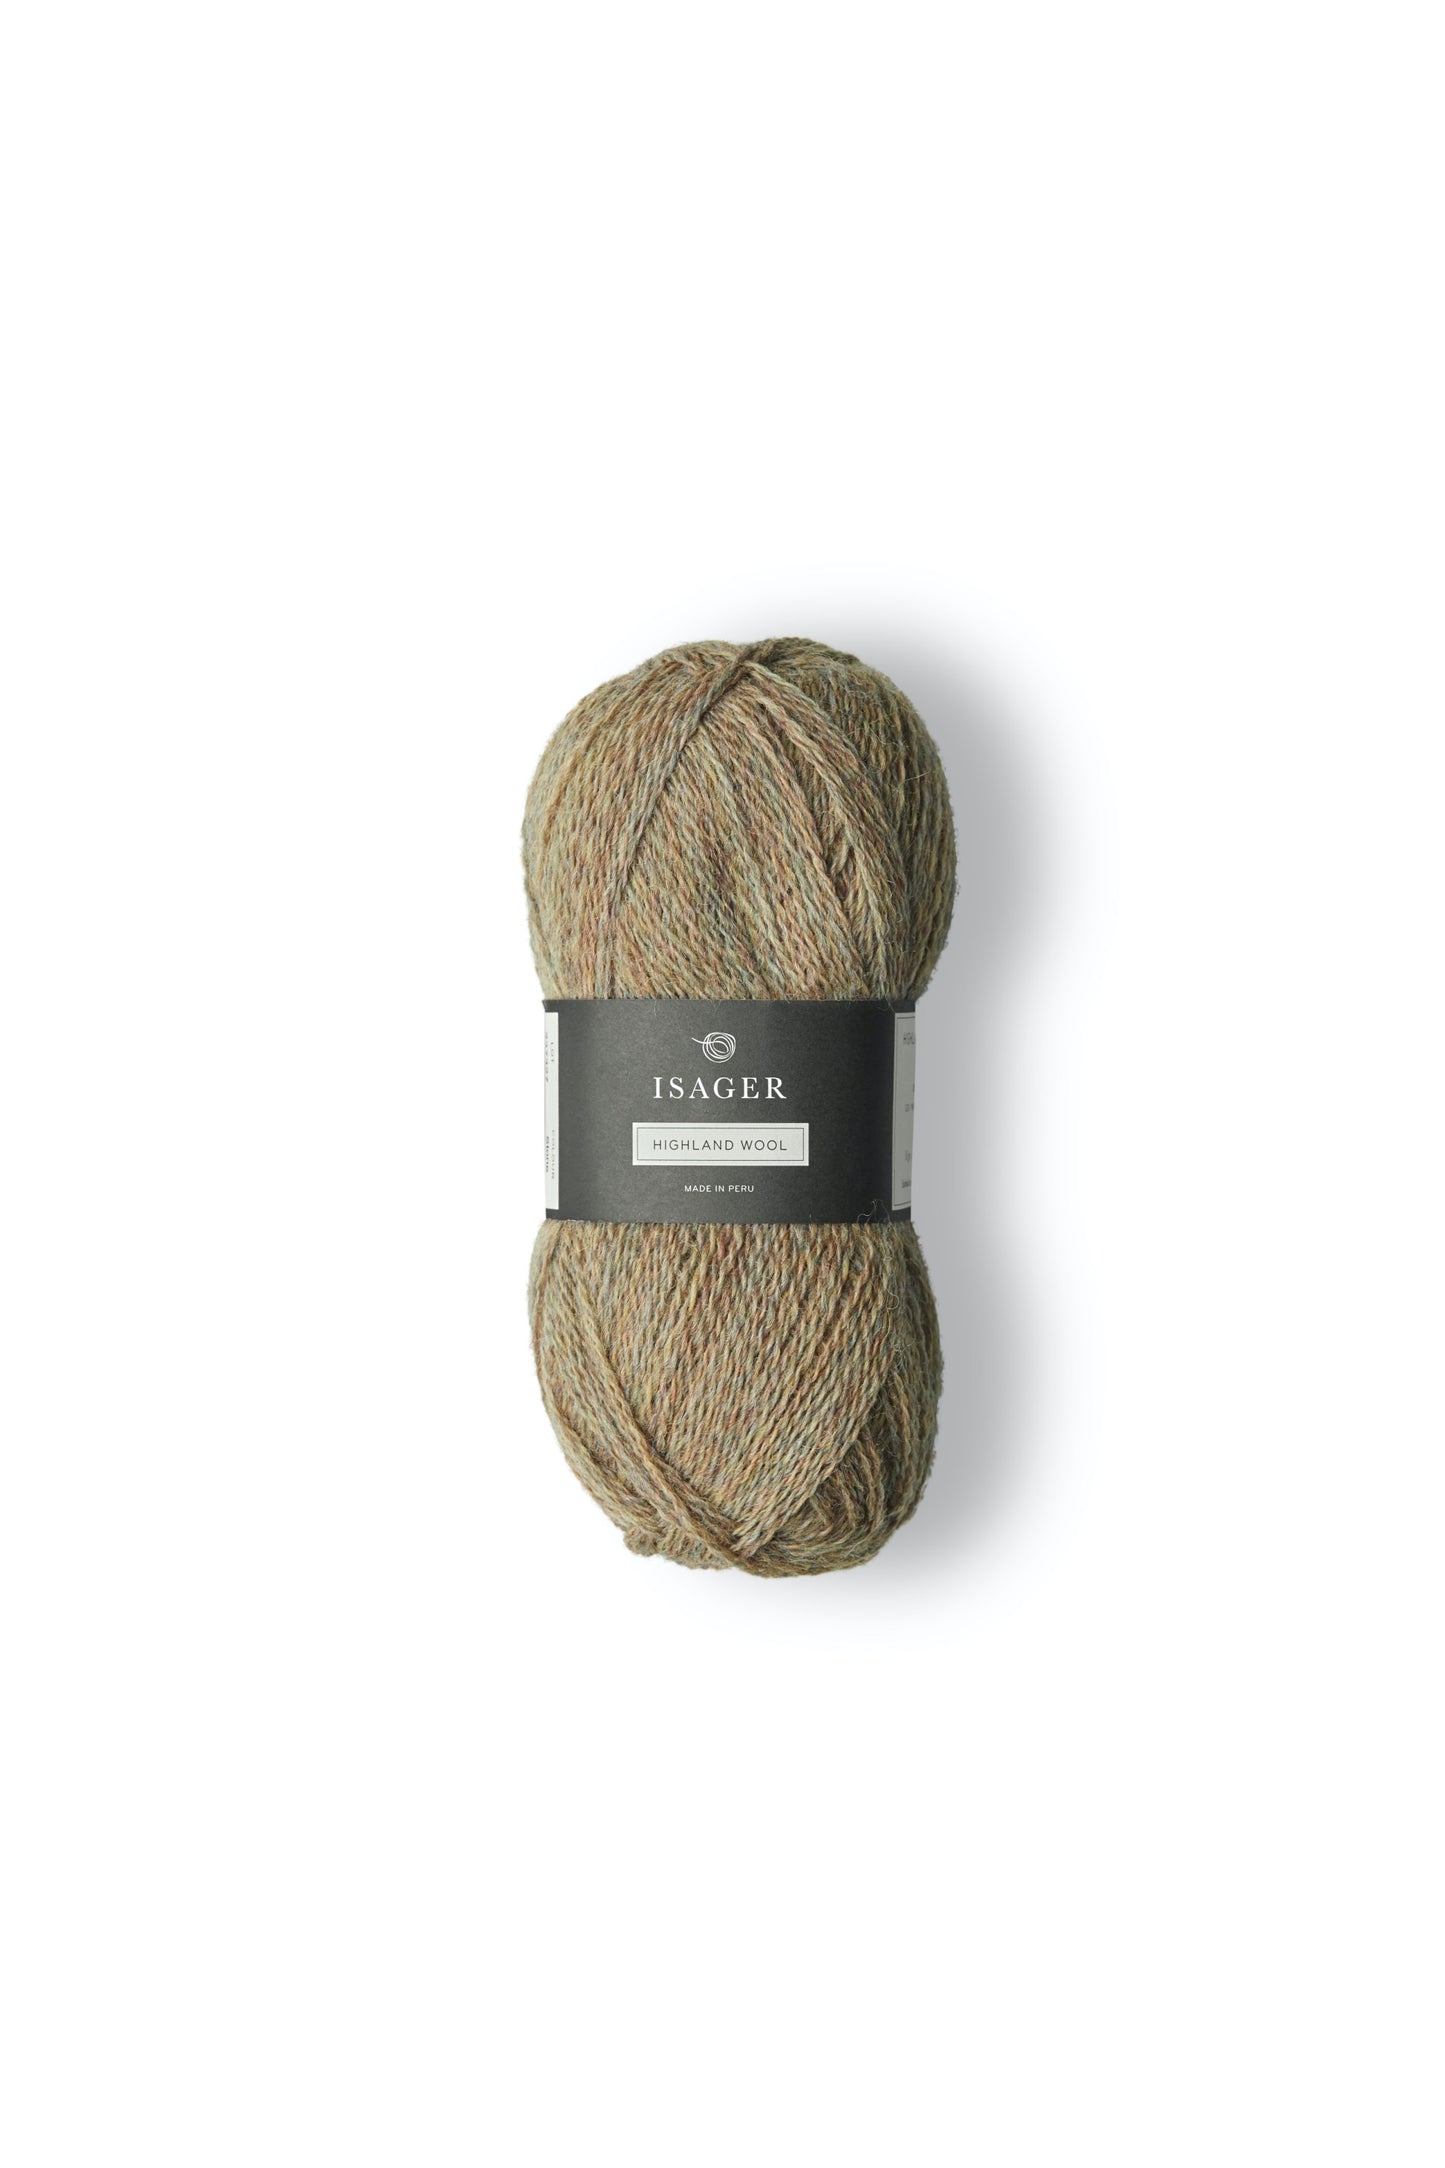 ISAGER Highland Wool